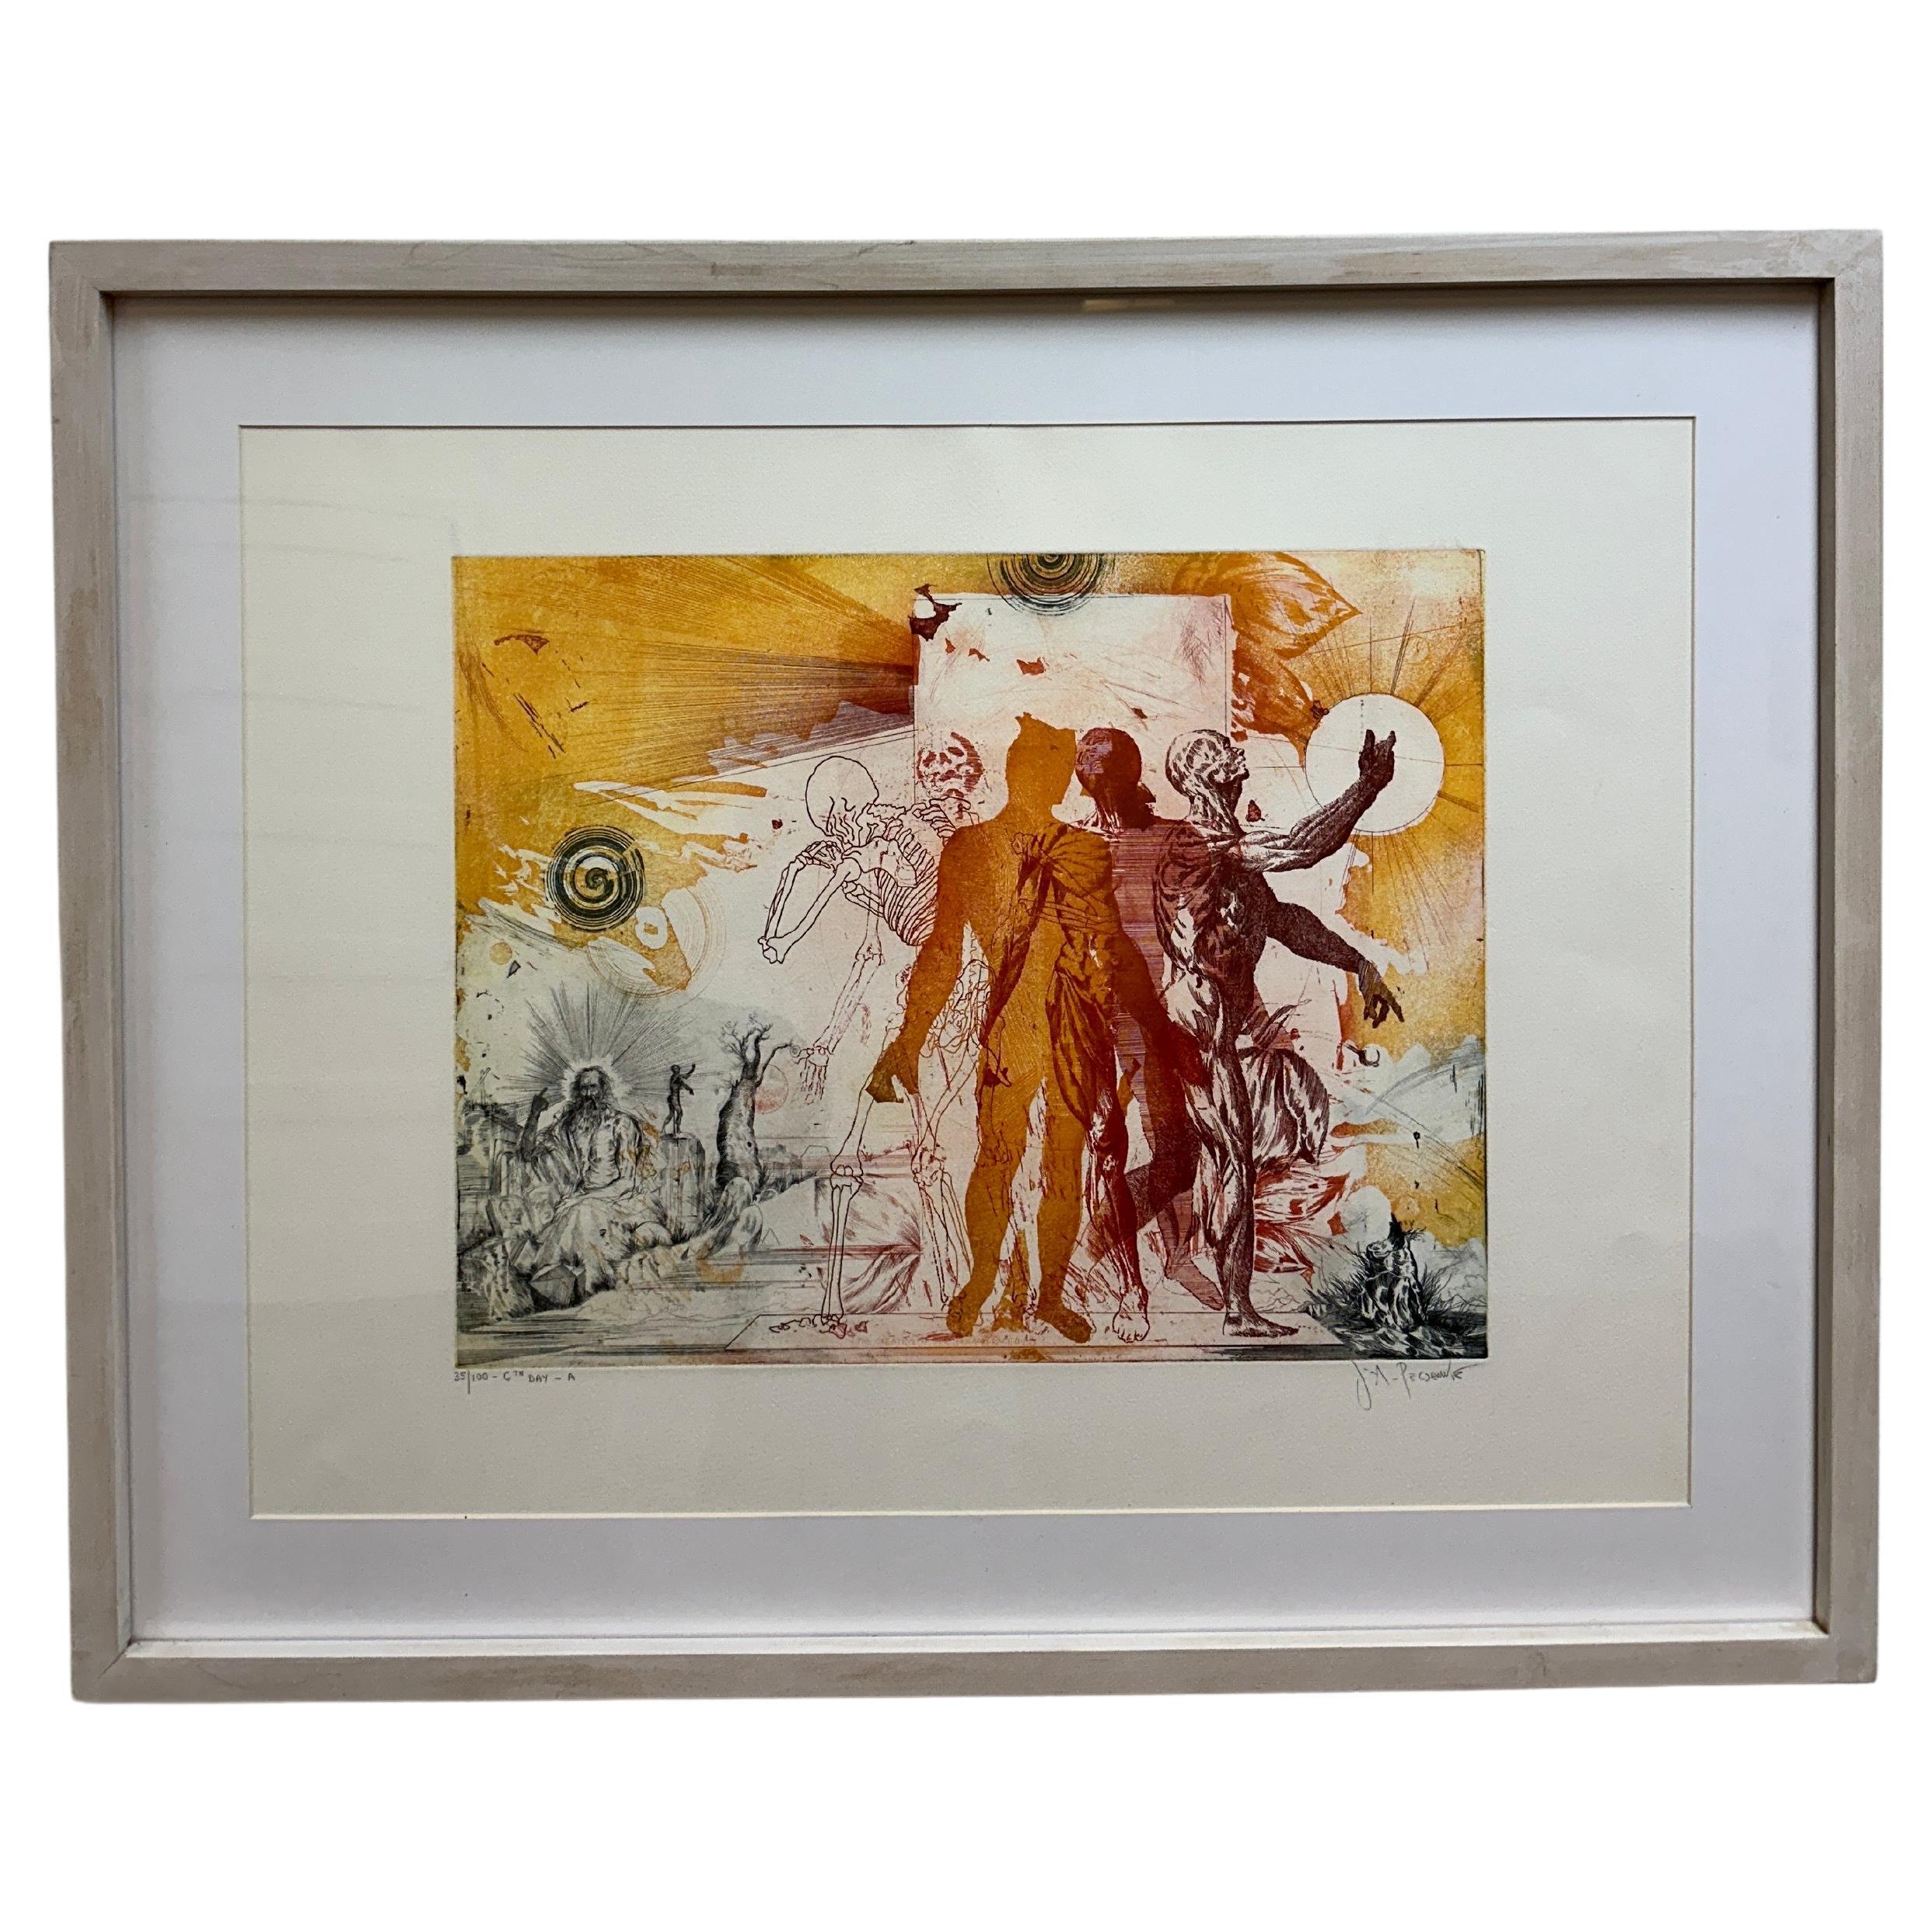 Joseph A Pecsenke 'The Sixth Day' Aquatint and Etching in Colors